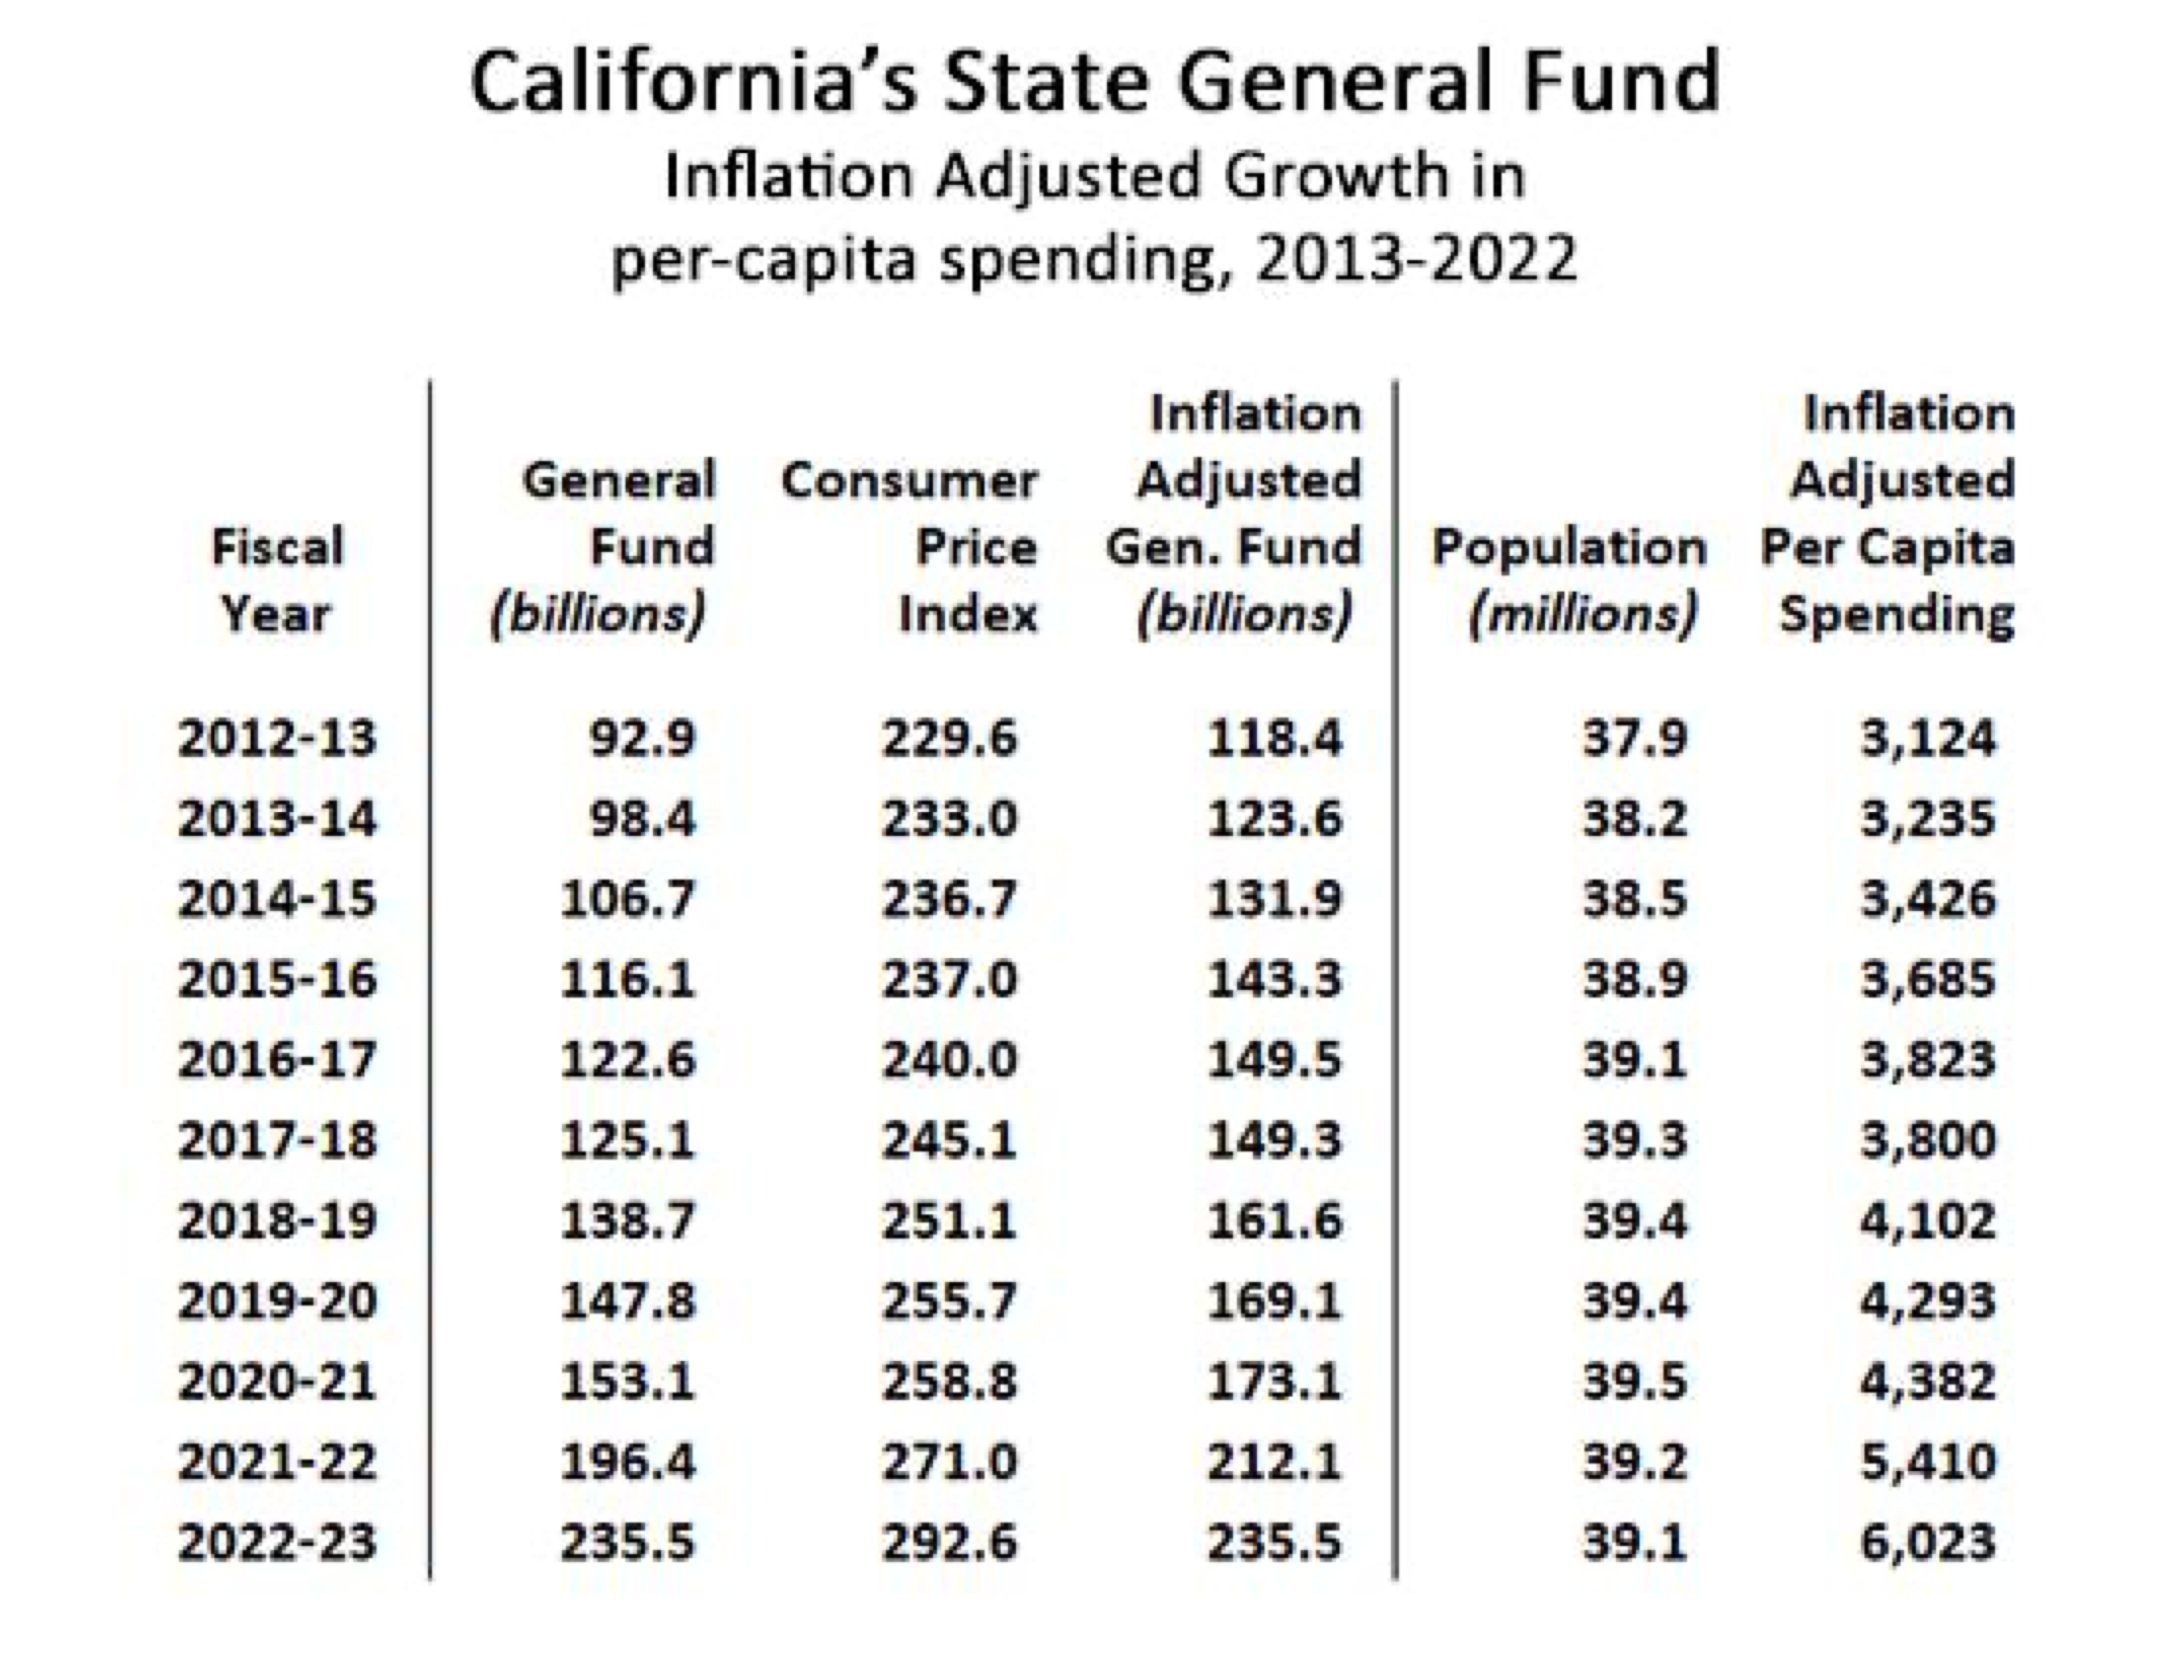 A Chart of California's General Fund. The Chart shows inflation-adjusted per capita spending for California increase from $3,124 in the 2012-2013 fiscal year to $6,023 in the 2022-23 fiscal year.